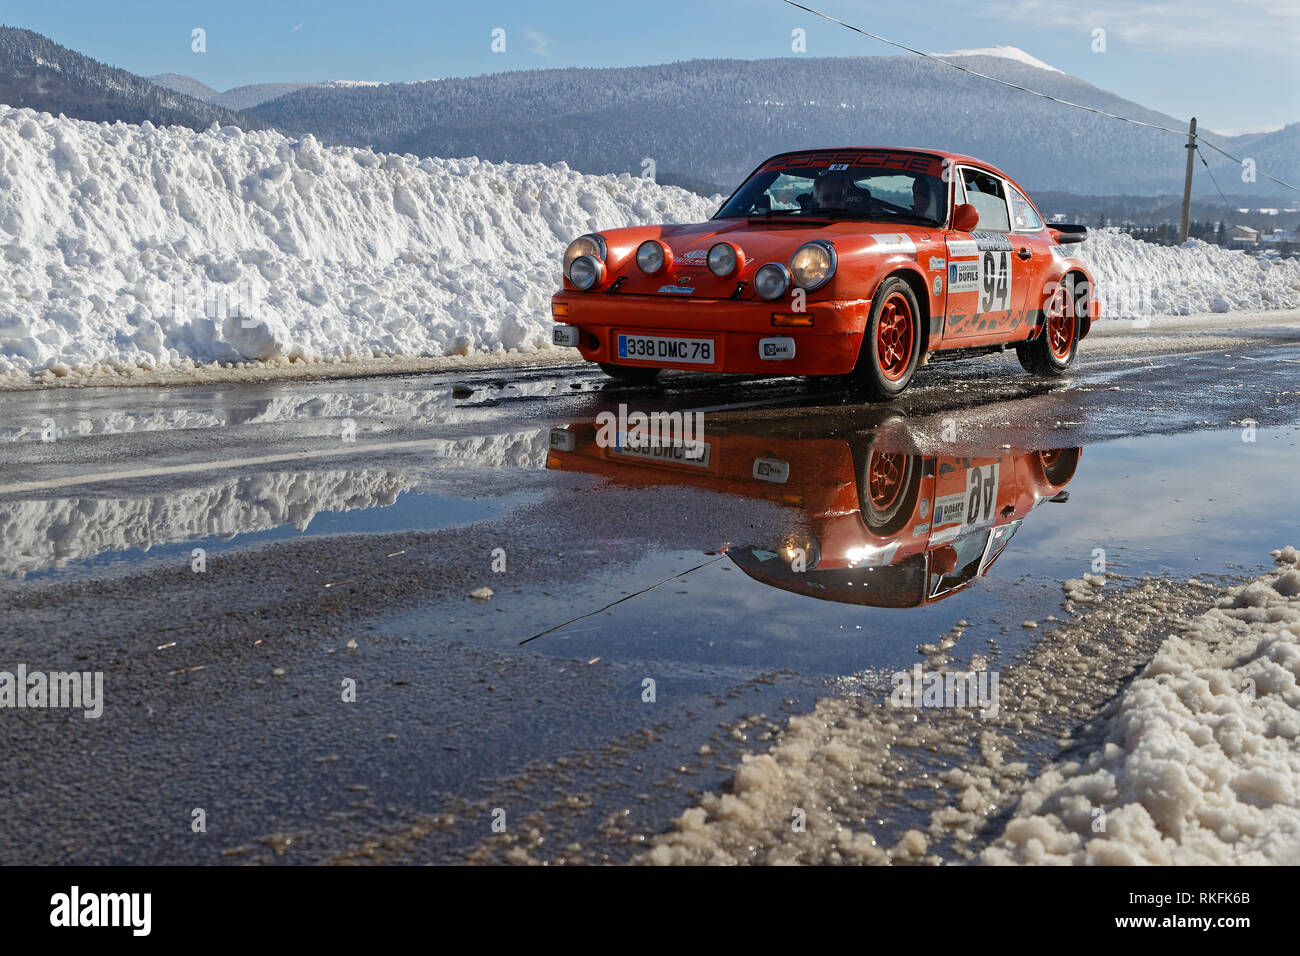 VASSIEUX, FRANCE, February 4, 2019 : Winter rally on the Vercors Roads. Rallye Historique is reserved to those cars which have participated in the Ral Stock Photo